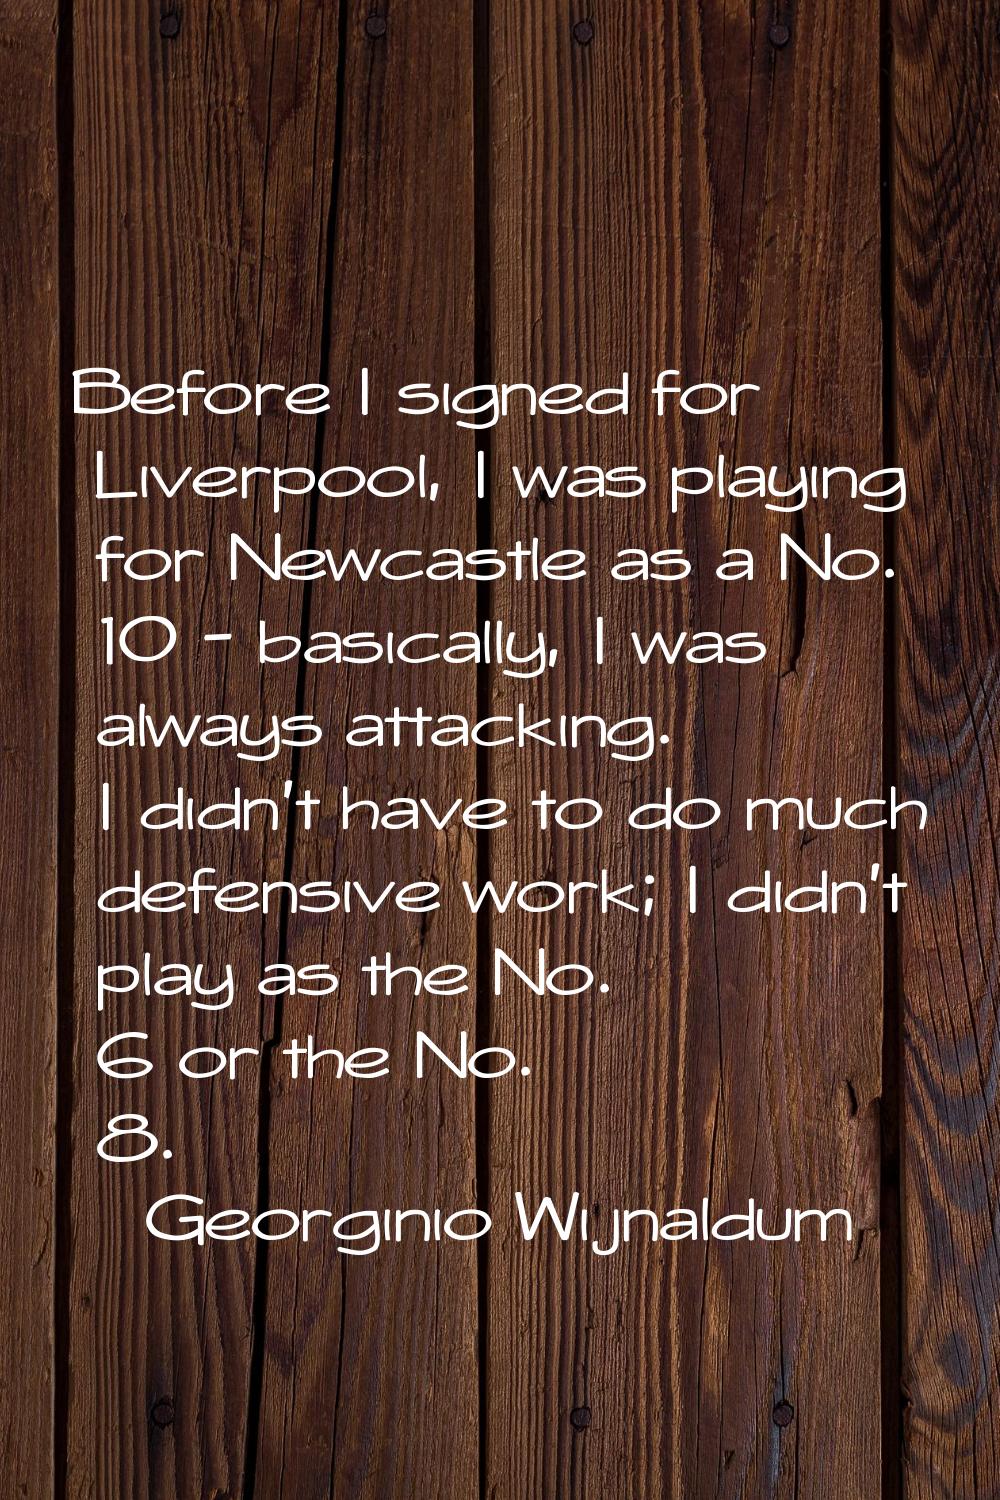 Before I signed for Liverpool, I was playing for Newcastle as a No. 10 - basically, I was always at